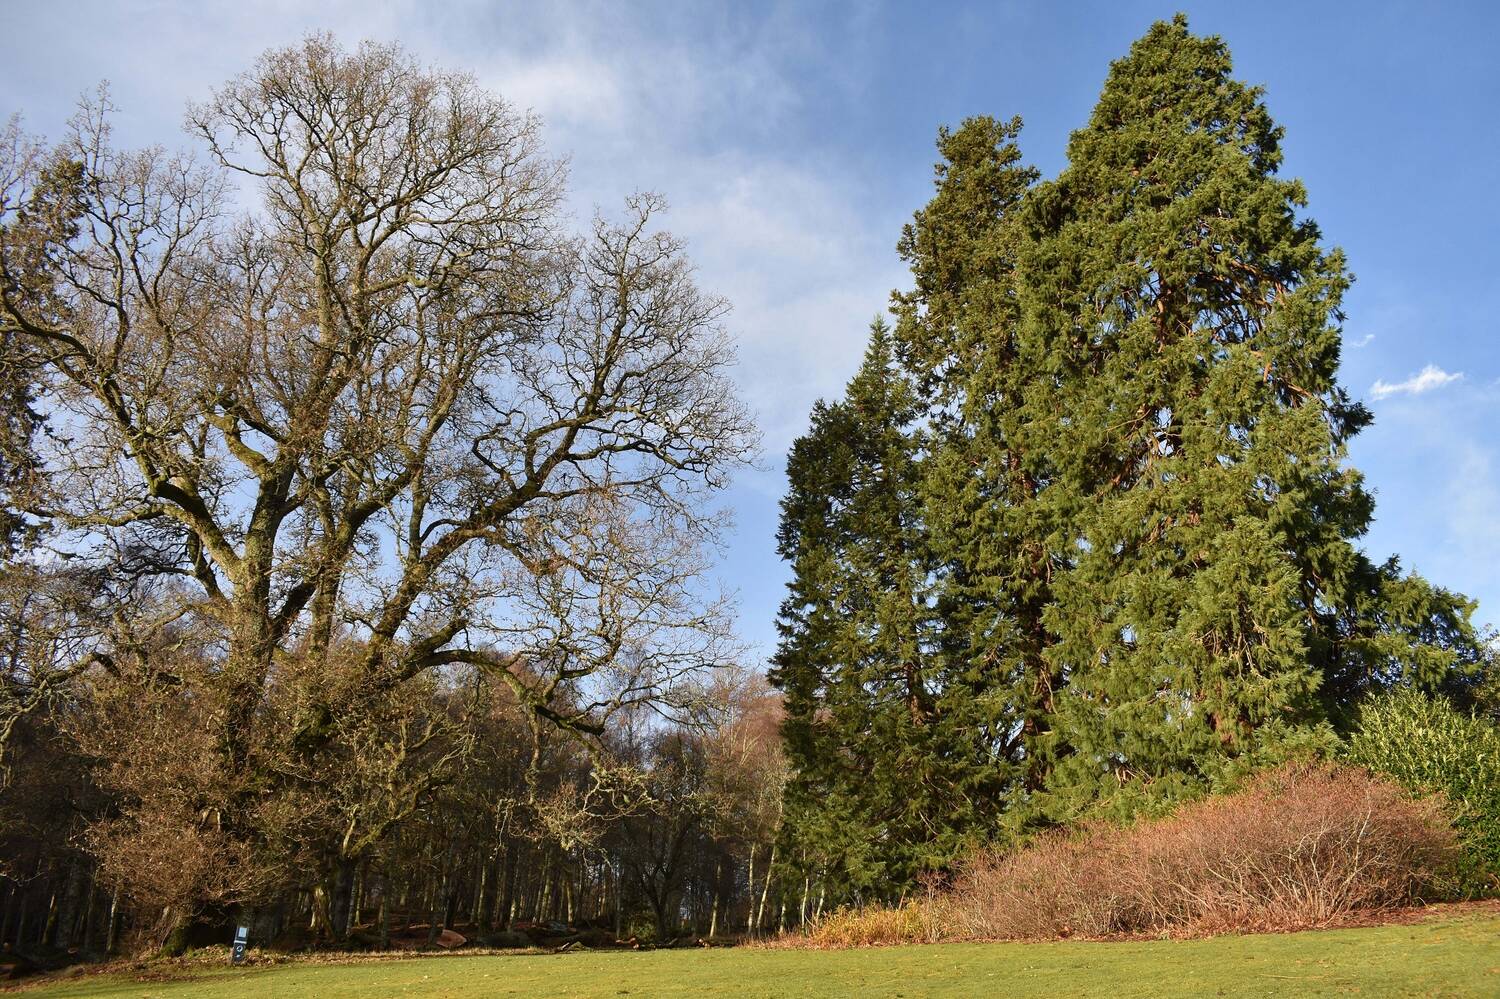 A photo of a tall, bare-branched oak tree standing beside a slightly taller, dark green conifer tree. A lawn lies in the foreground. Both tree are silhouetted against a blue sky.